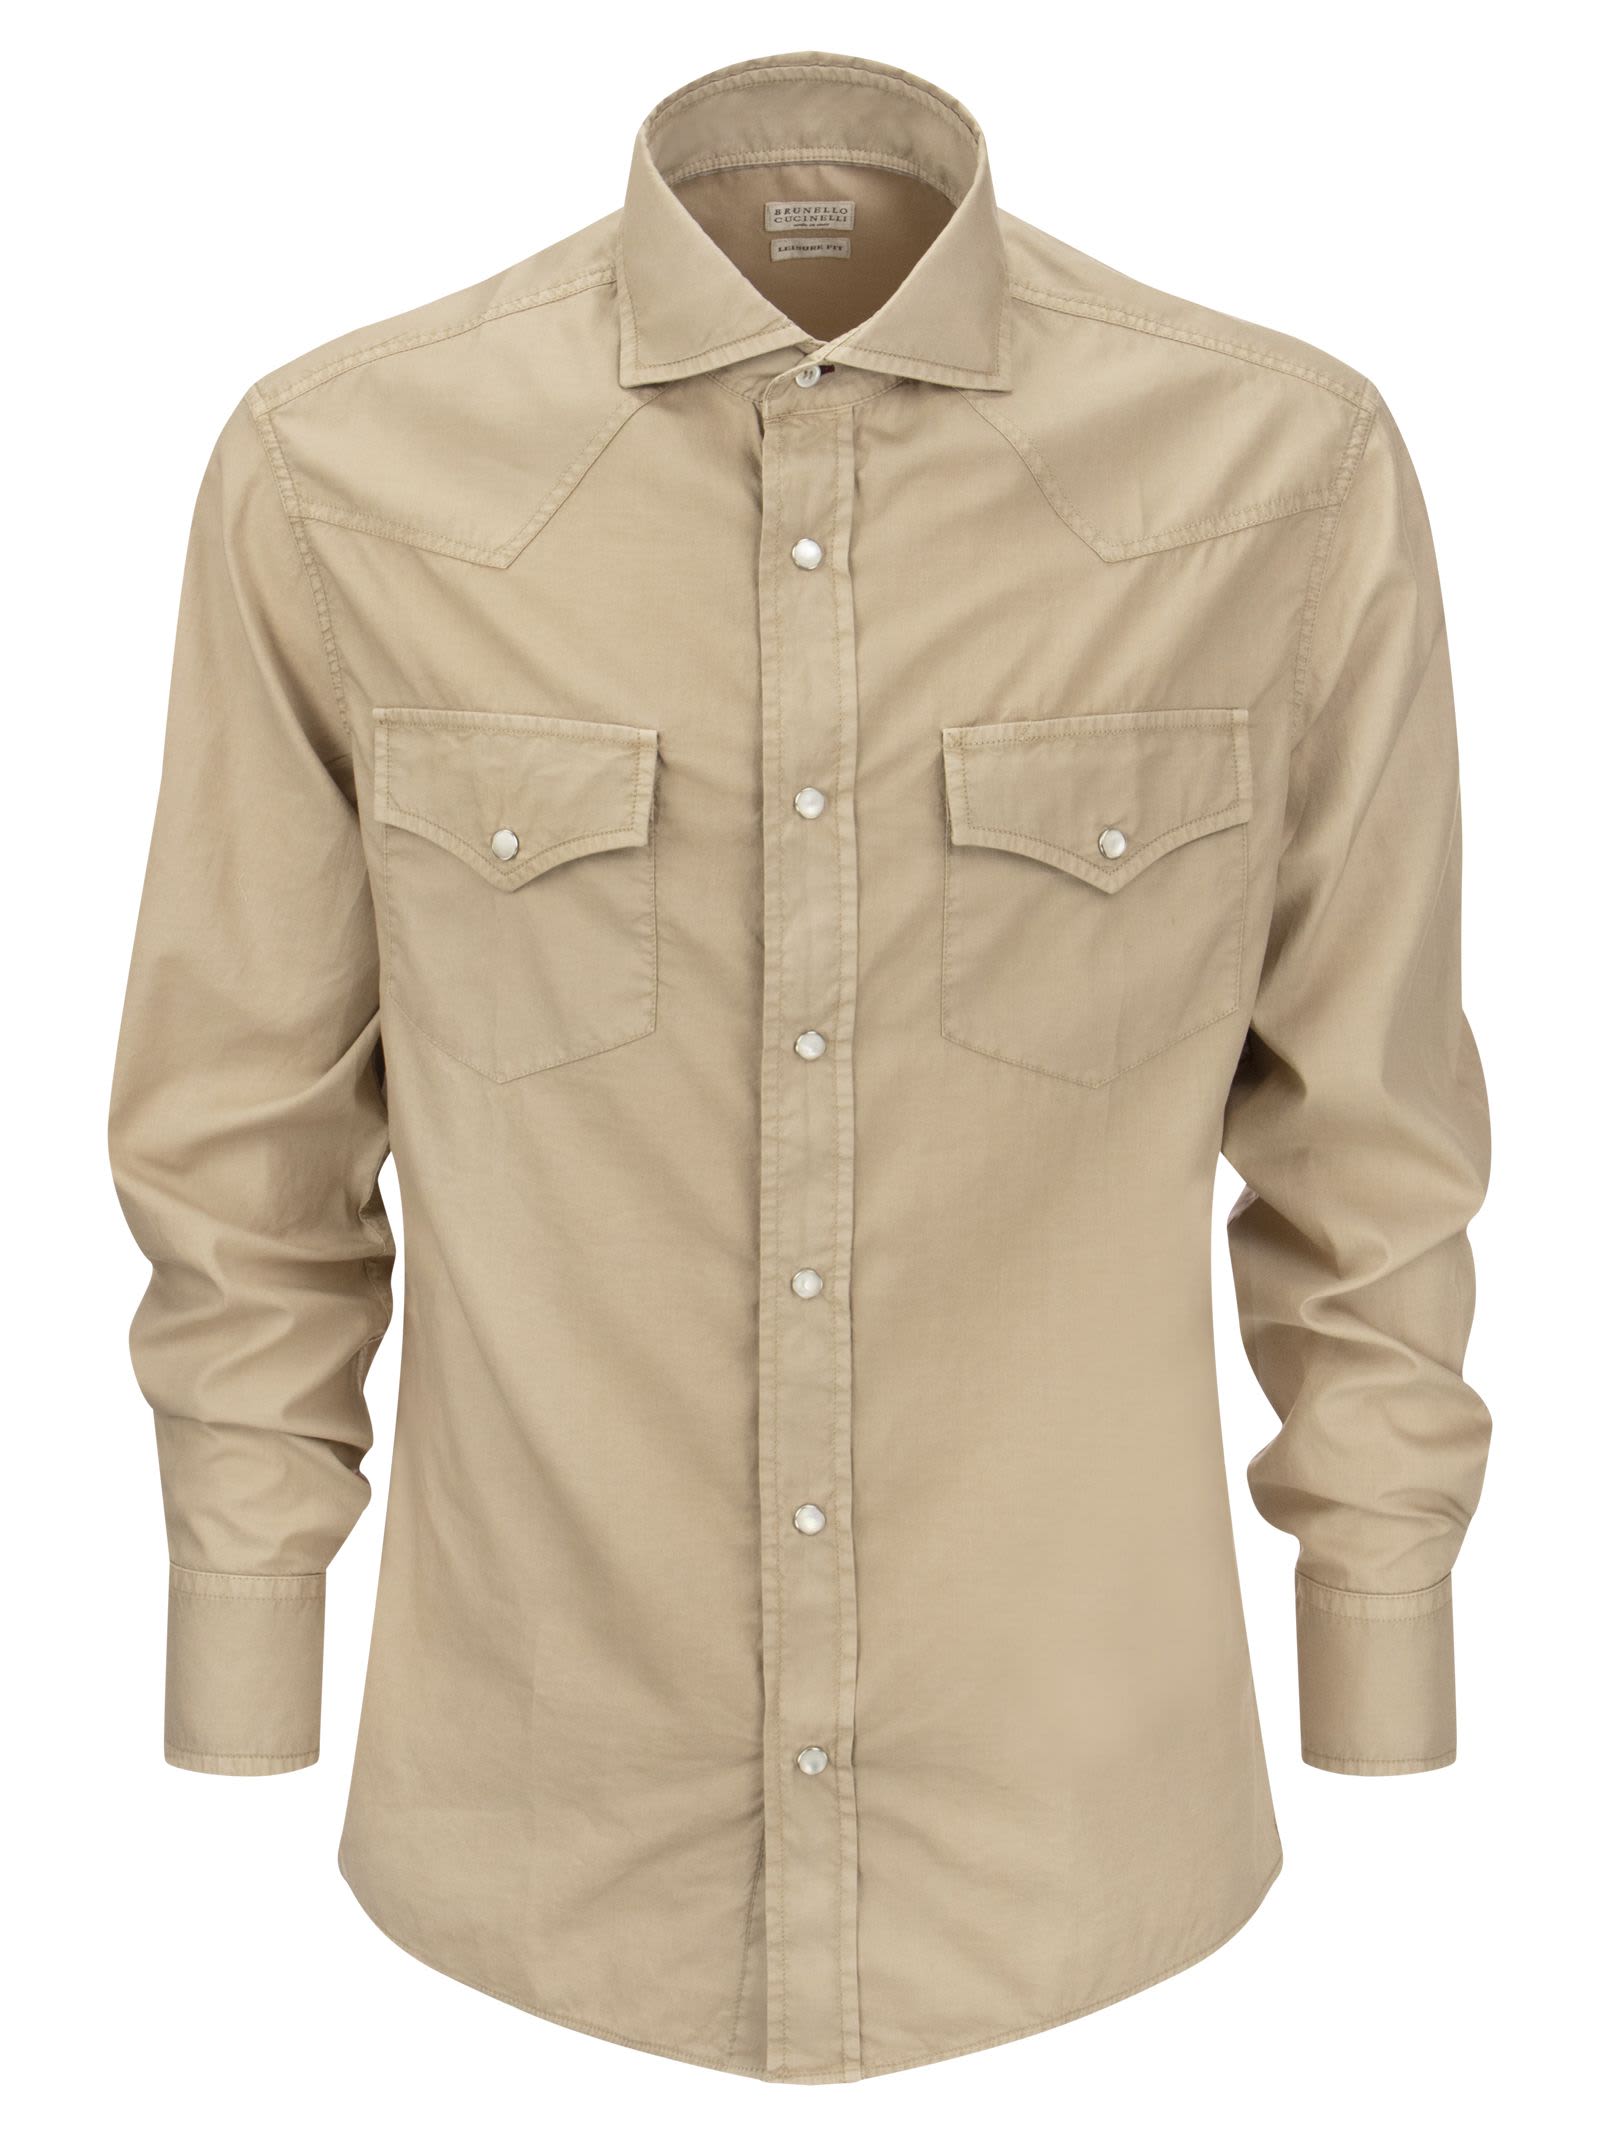 Brunello Cucinelli Garment Dyed Oxford Leisure Fit Shirt With Press Studs, Shoulder Pad And Pockets